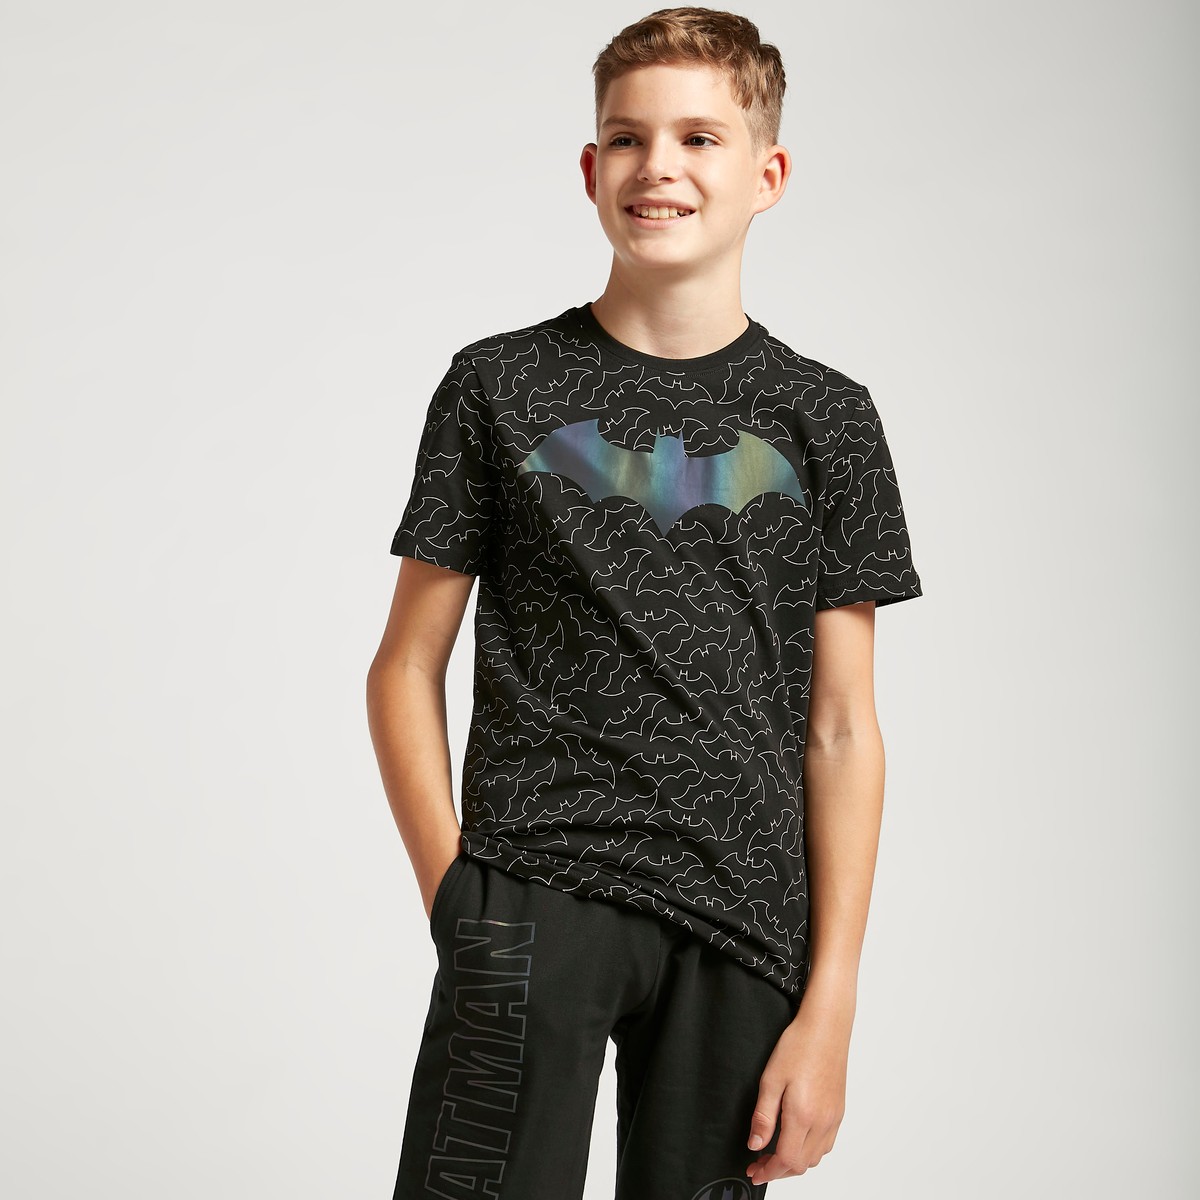 Reflective All-Over Batman Print Round Neck T-shirt with Short Sleeves 1